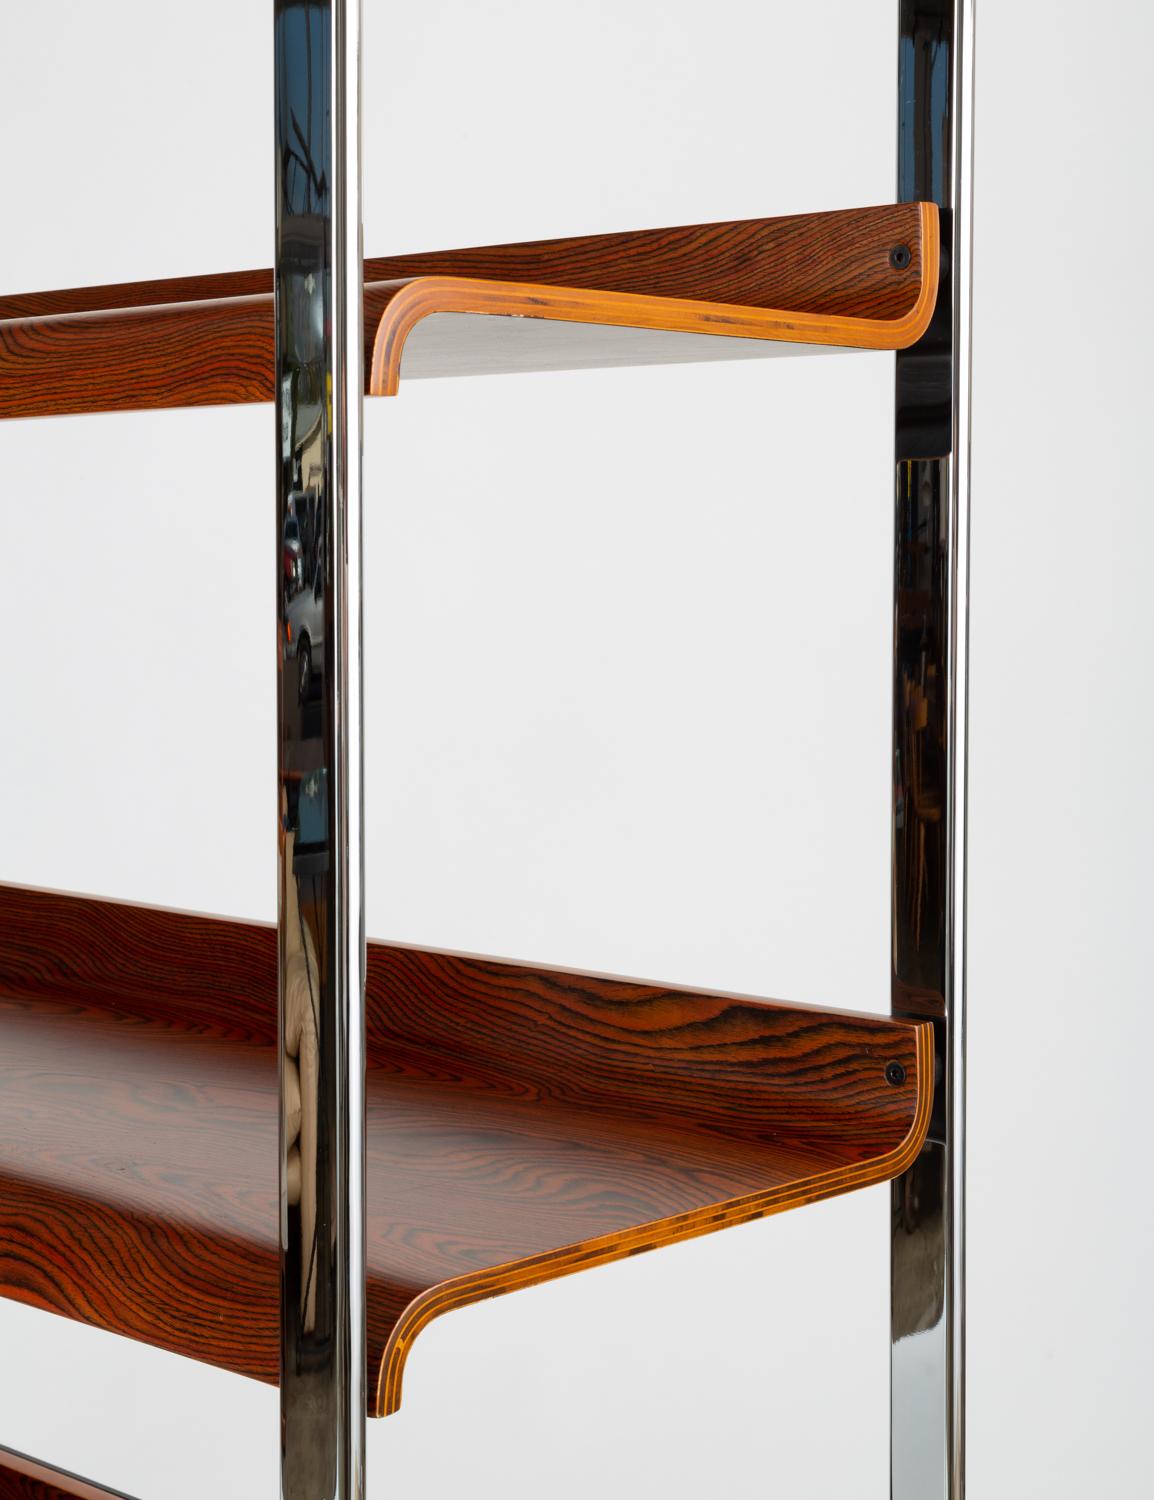 Late 20th Century Zebrawood and Chrome Bookshelf by Peter Protzmann for Herman Miller